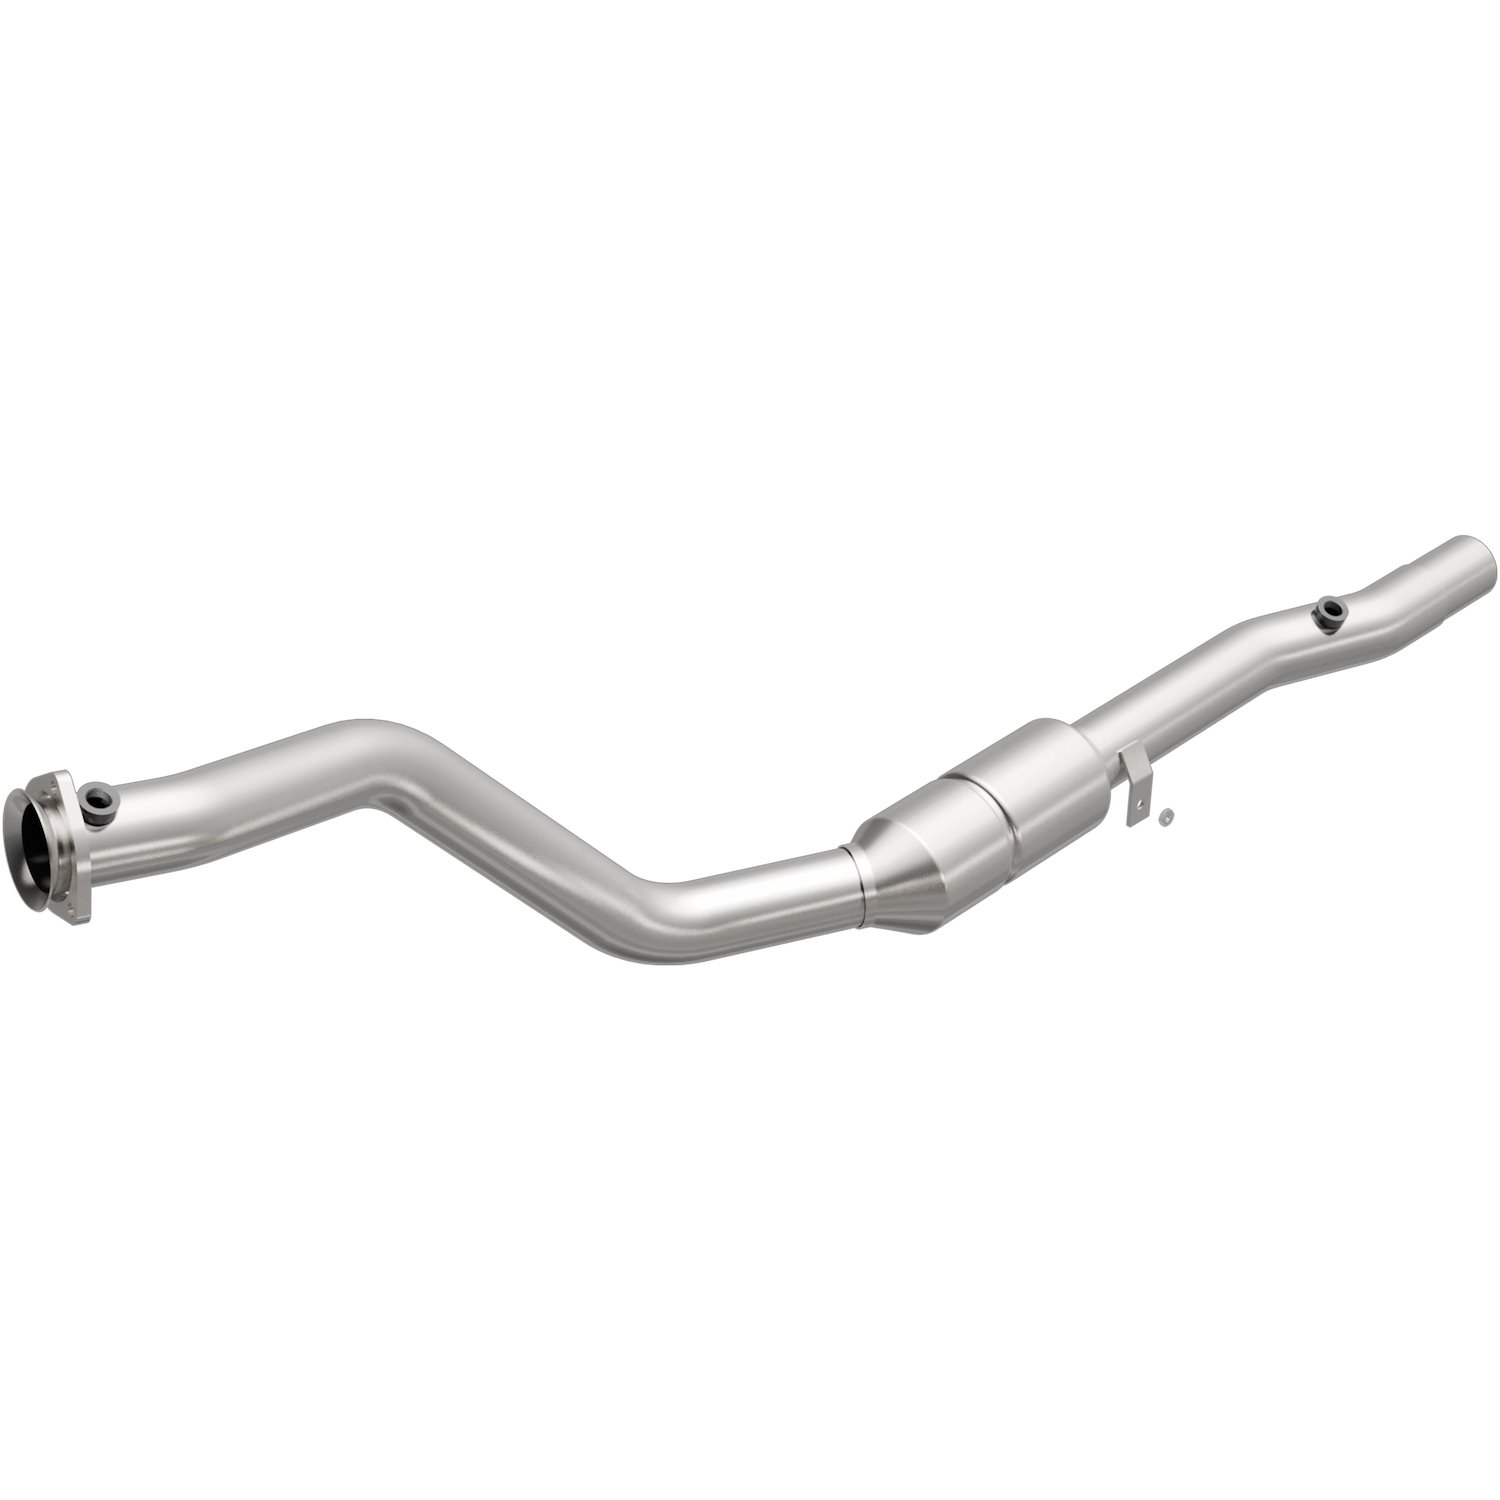 2001-2003 Audi S8 OEM Grade Federal / EPA Compliant Direct-Fit Catalytic Converter